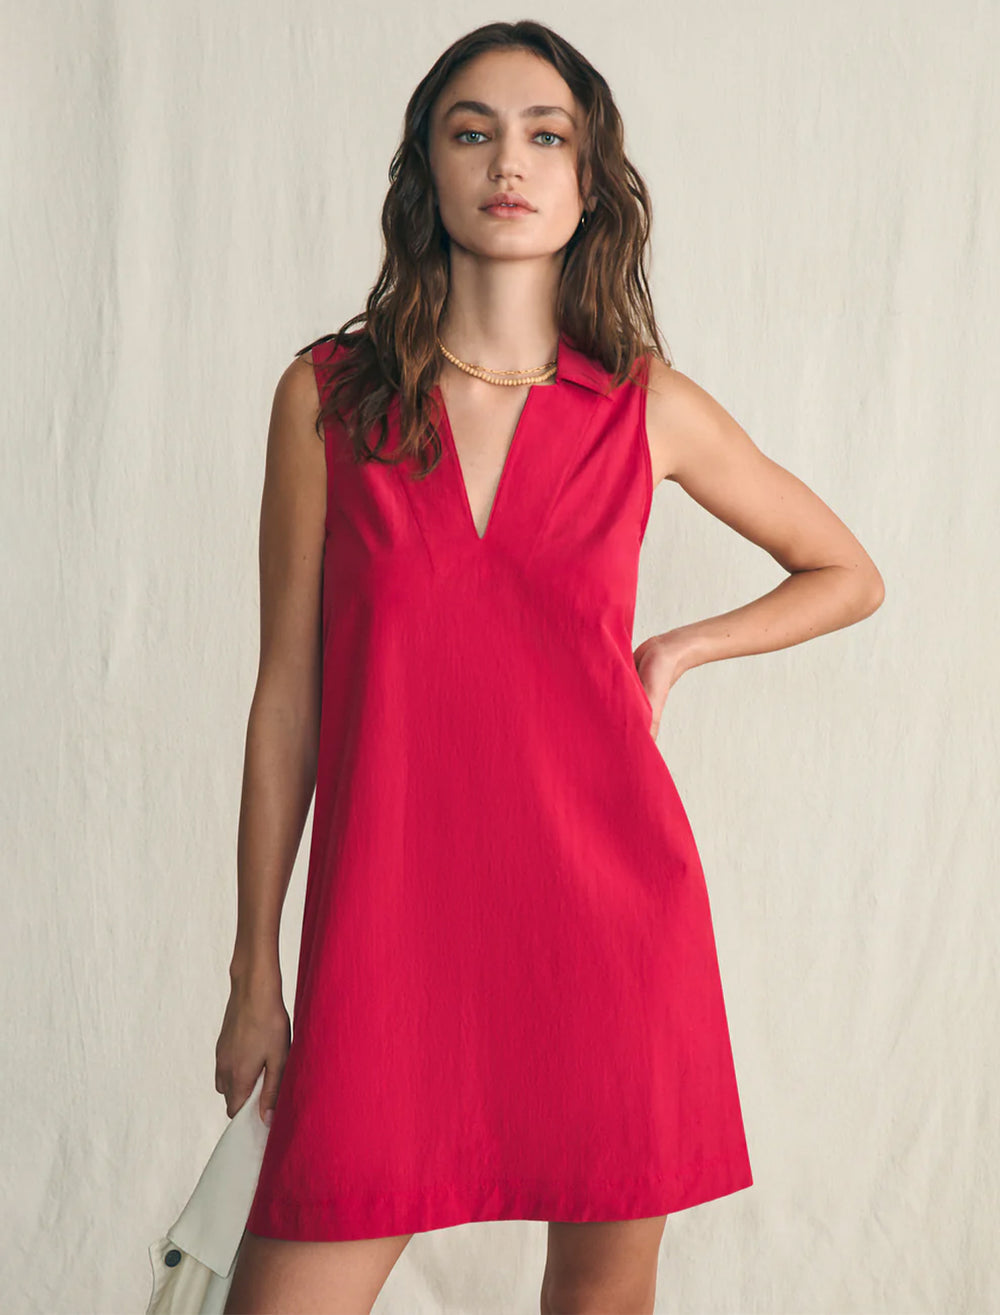 Model wearing Faherty's all day polo dress in granita.